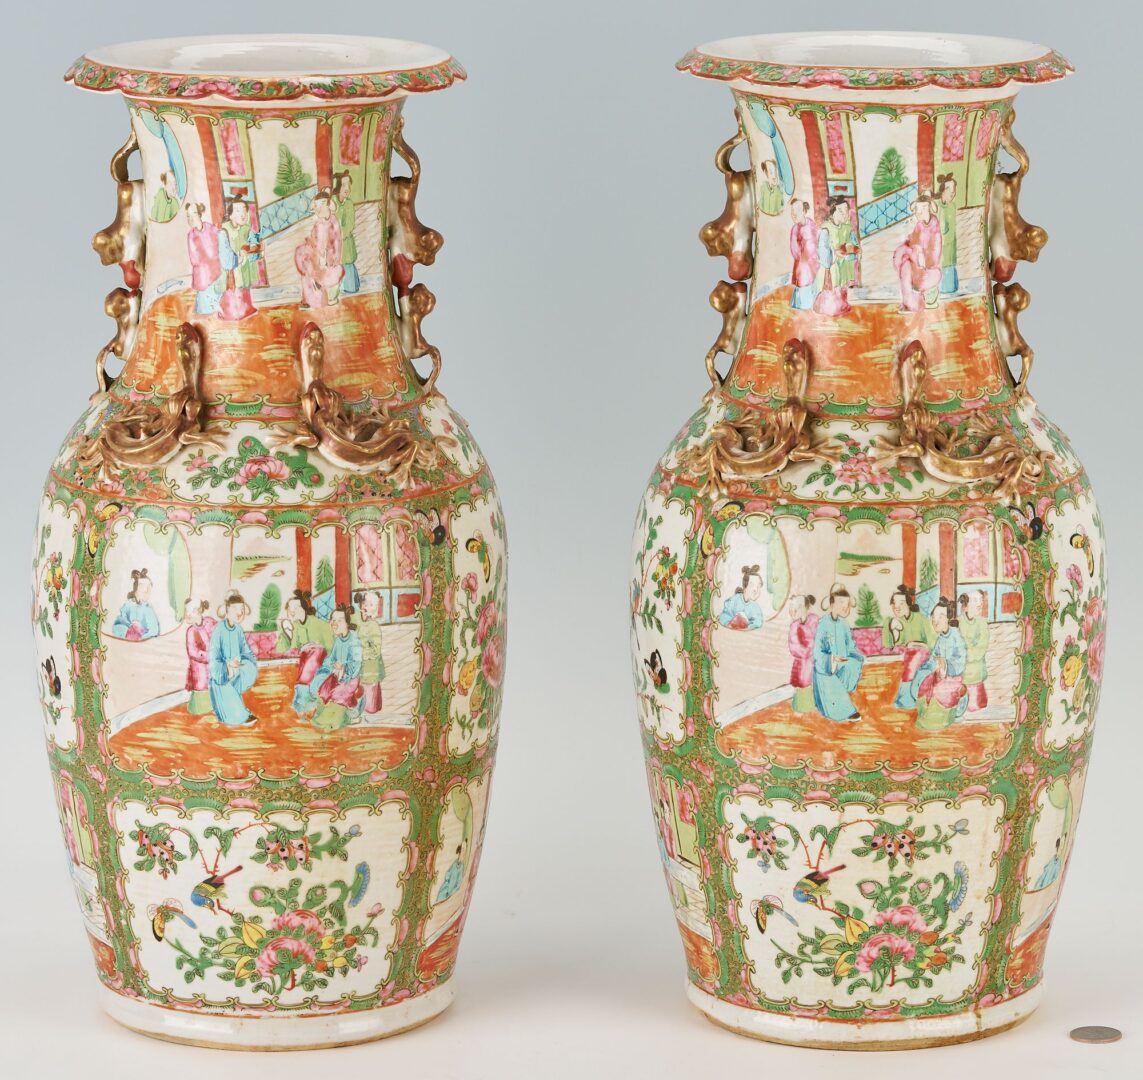 Lot 2: Pair Large Chinese Export Rose Medallion Vases